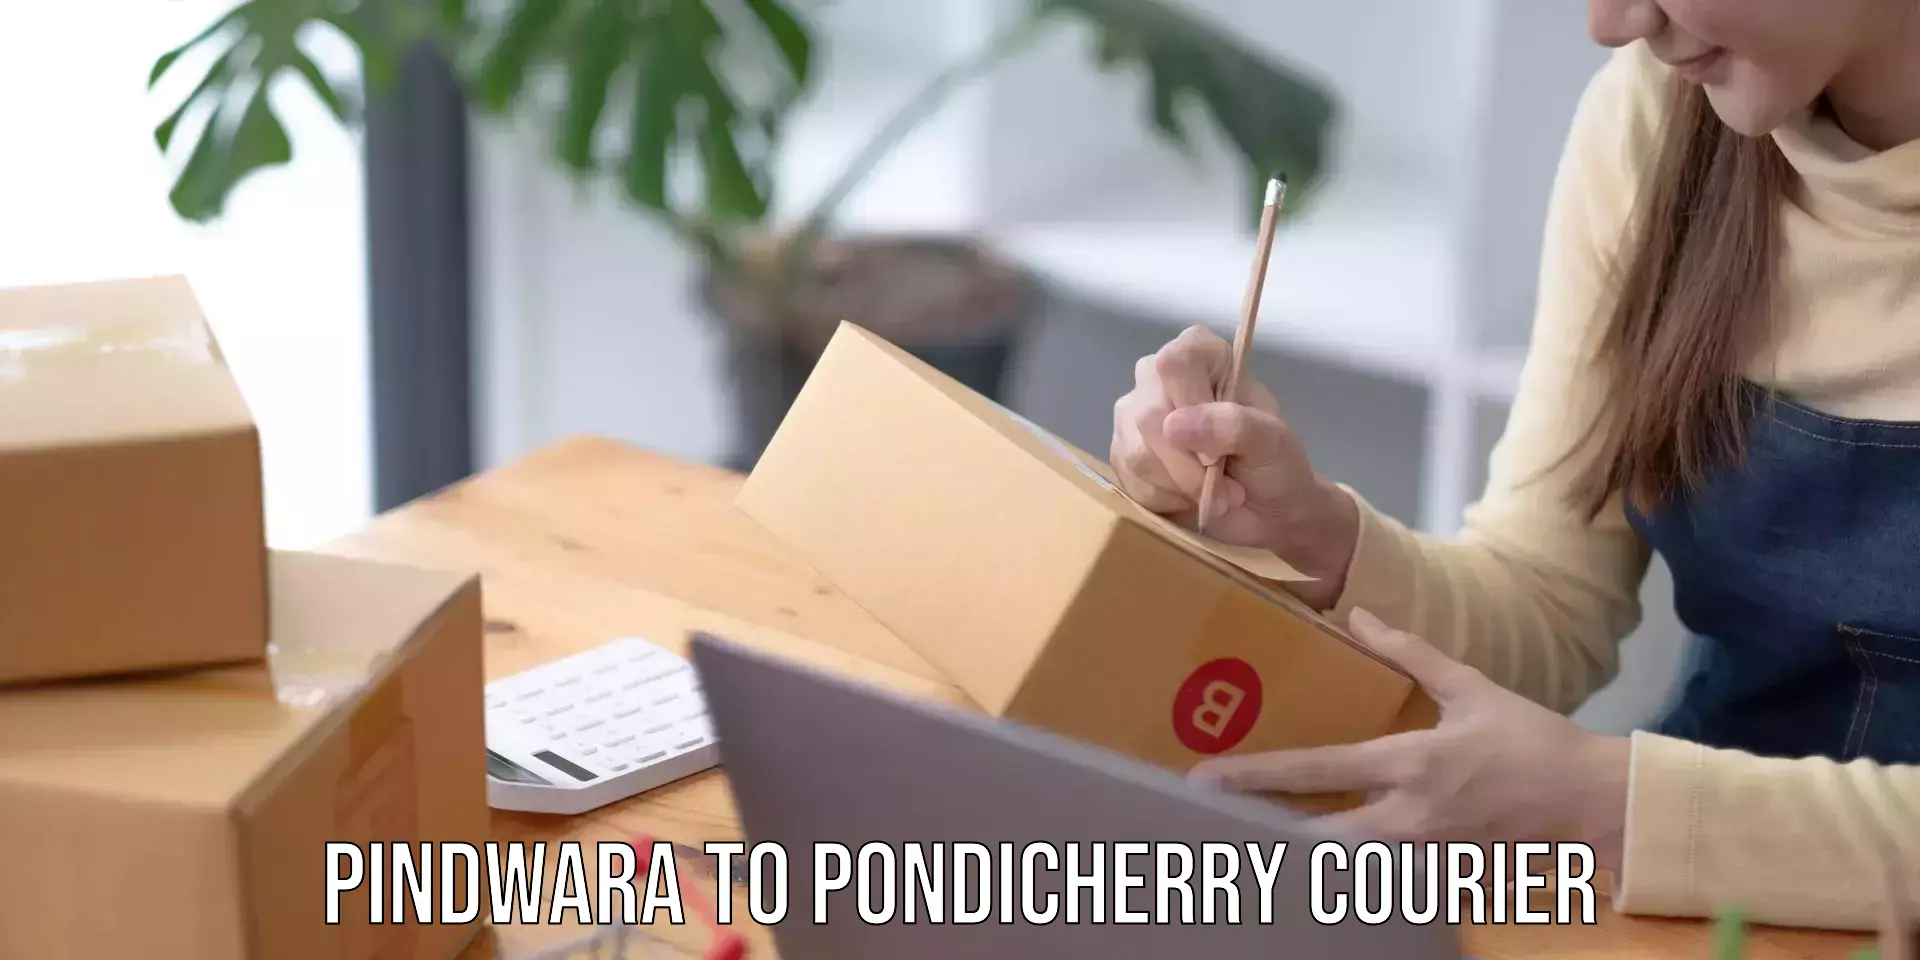 Subscription-based courier Pindwara to Pondicherry